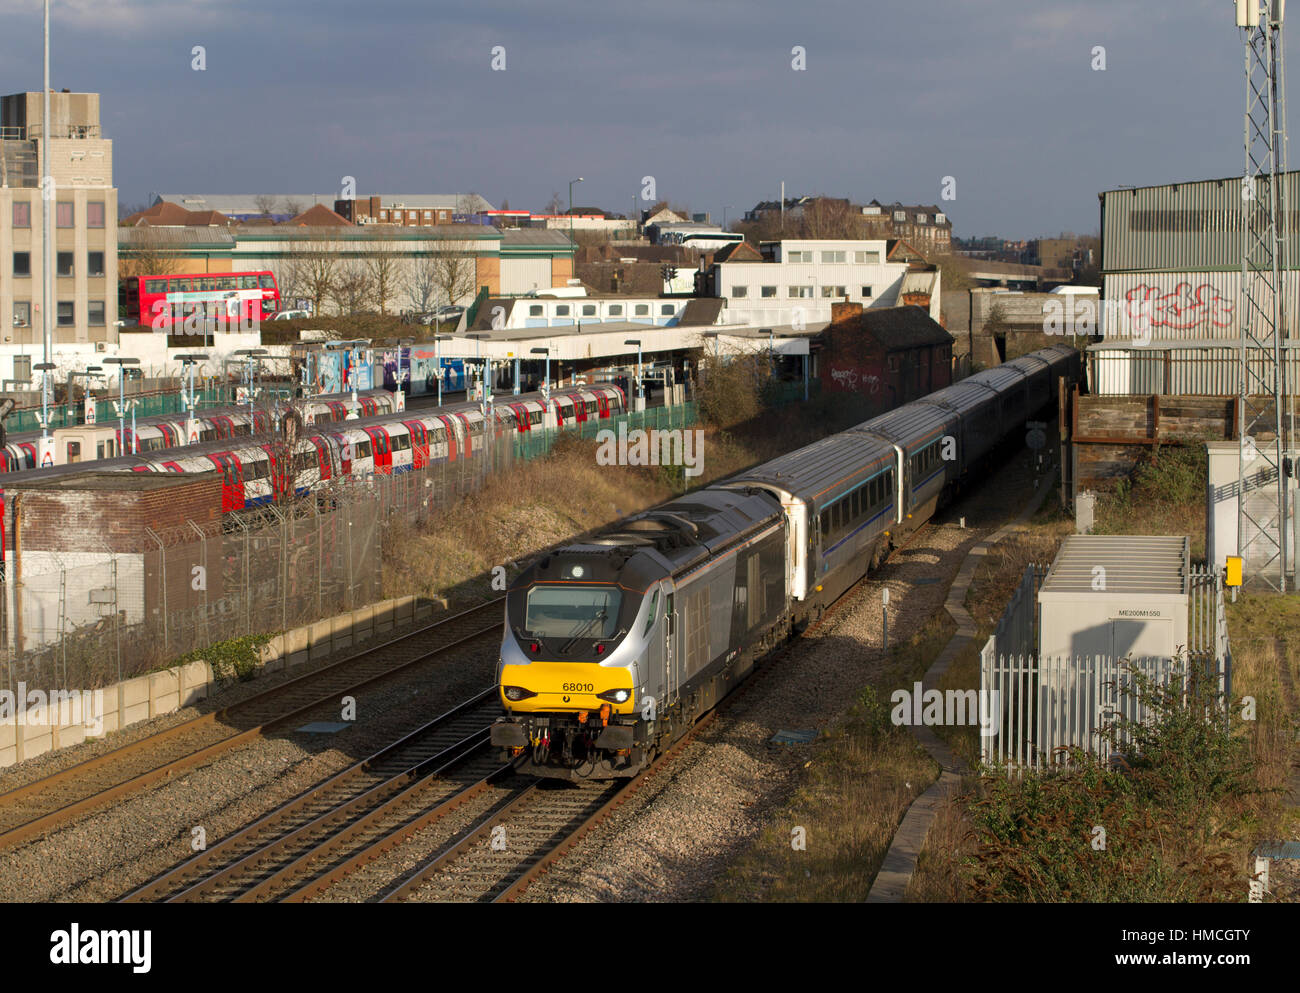 A DRS Class 68 diesel locomotive number 68010 working a Chiltern Railways service at Neasden on the 16th March 2016. Stock Photo